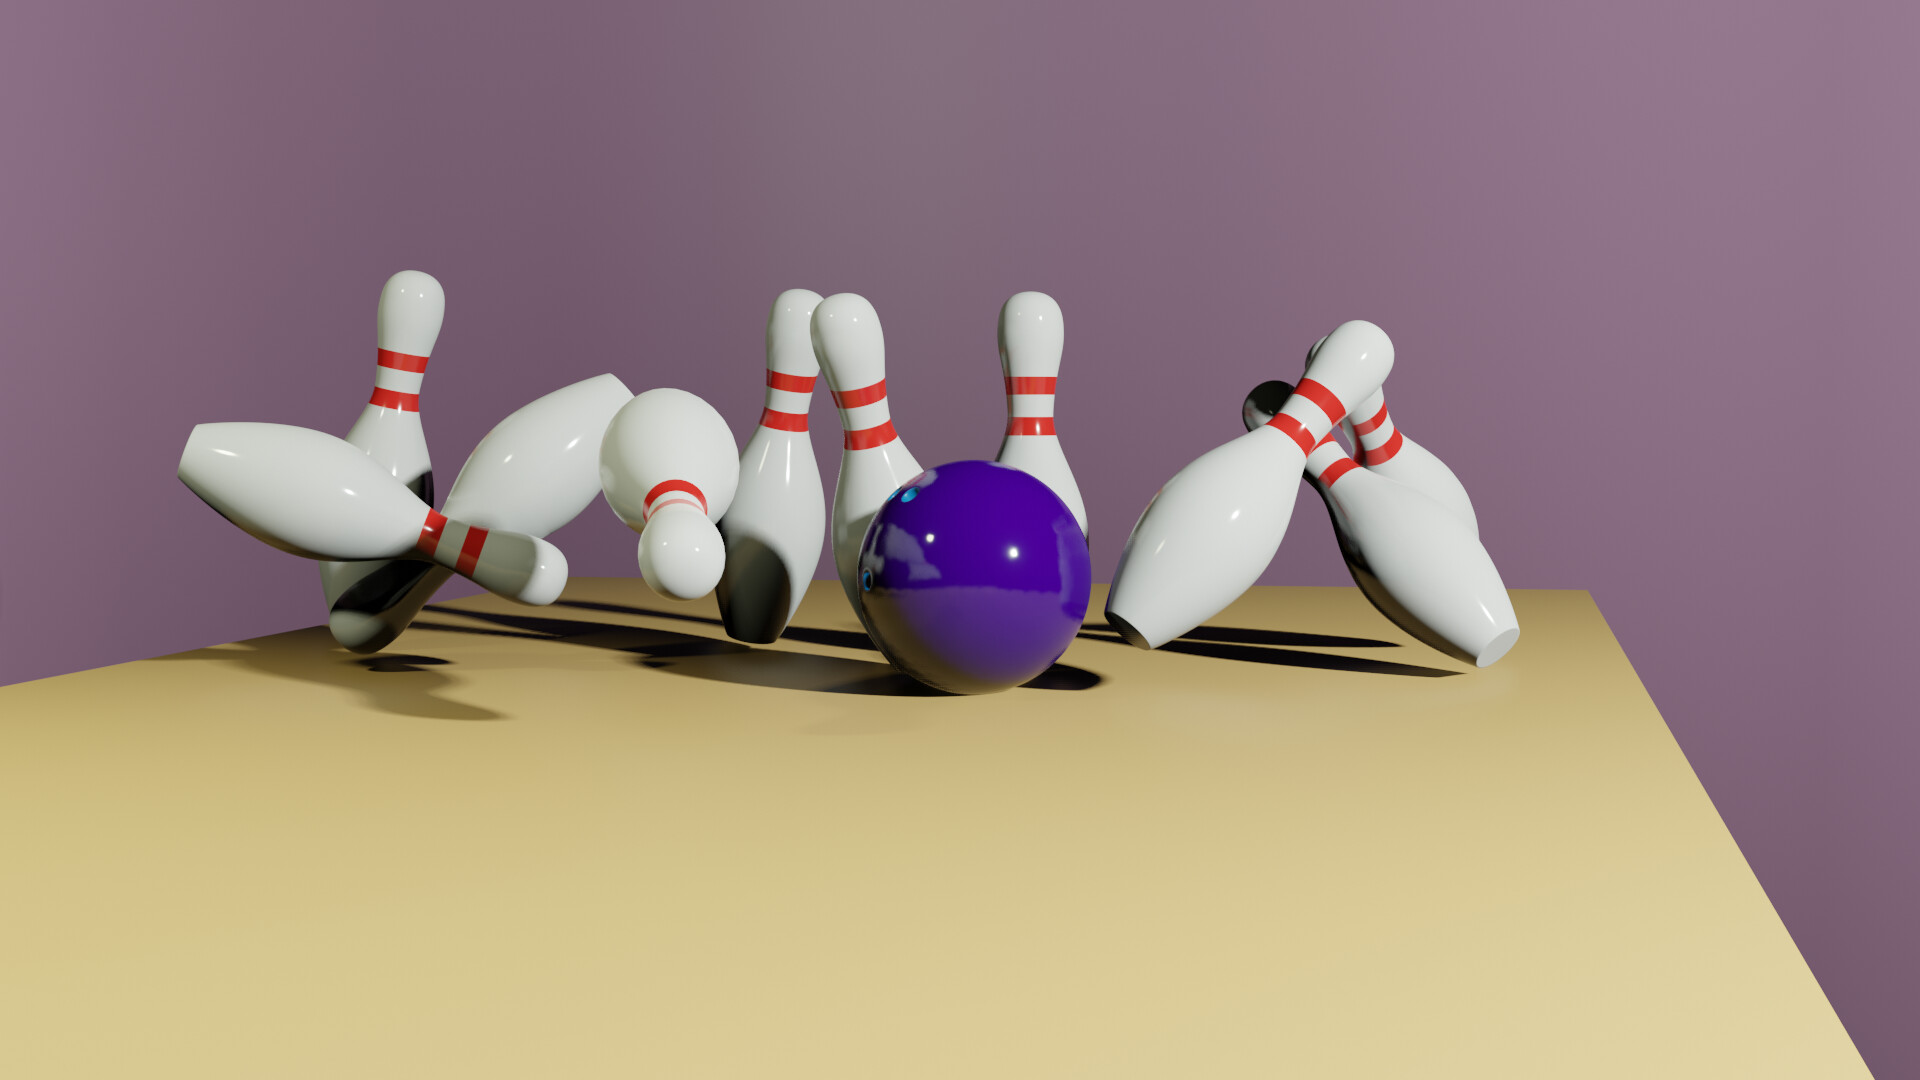 Bowling strike png and animated gif - Show - GameDev.tv